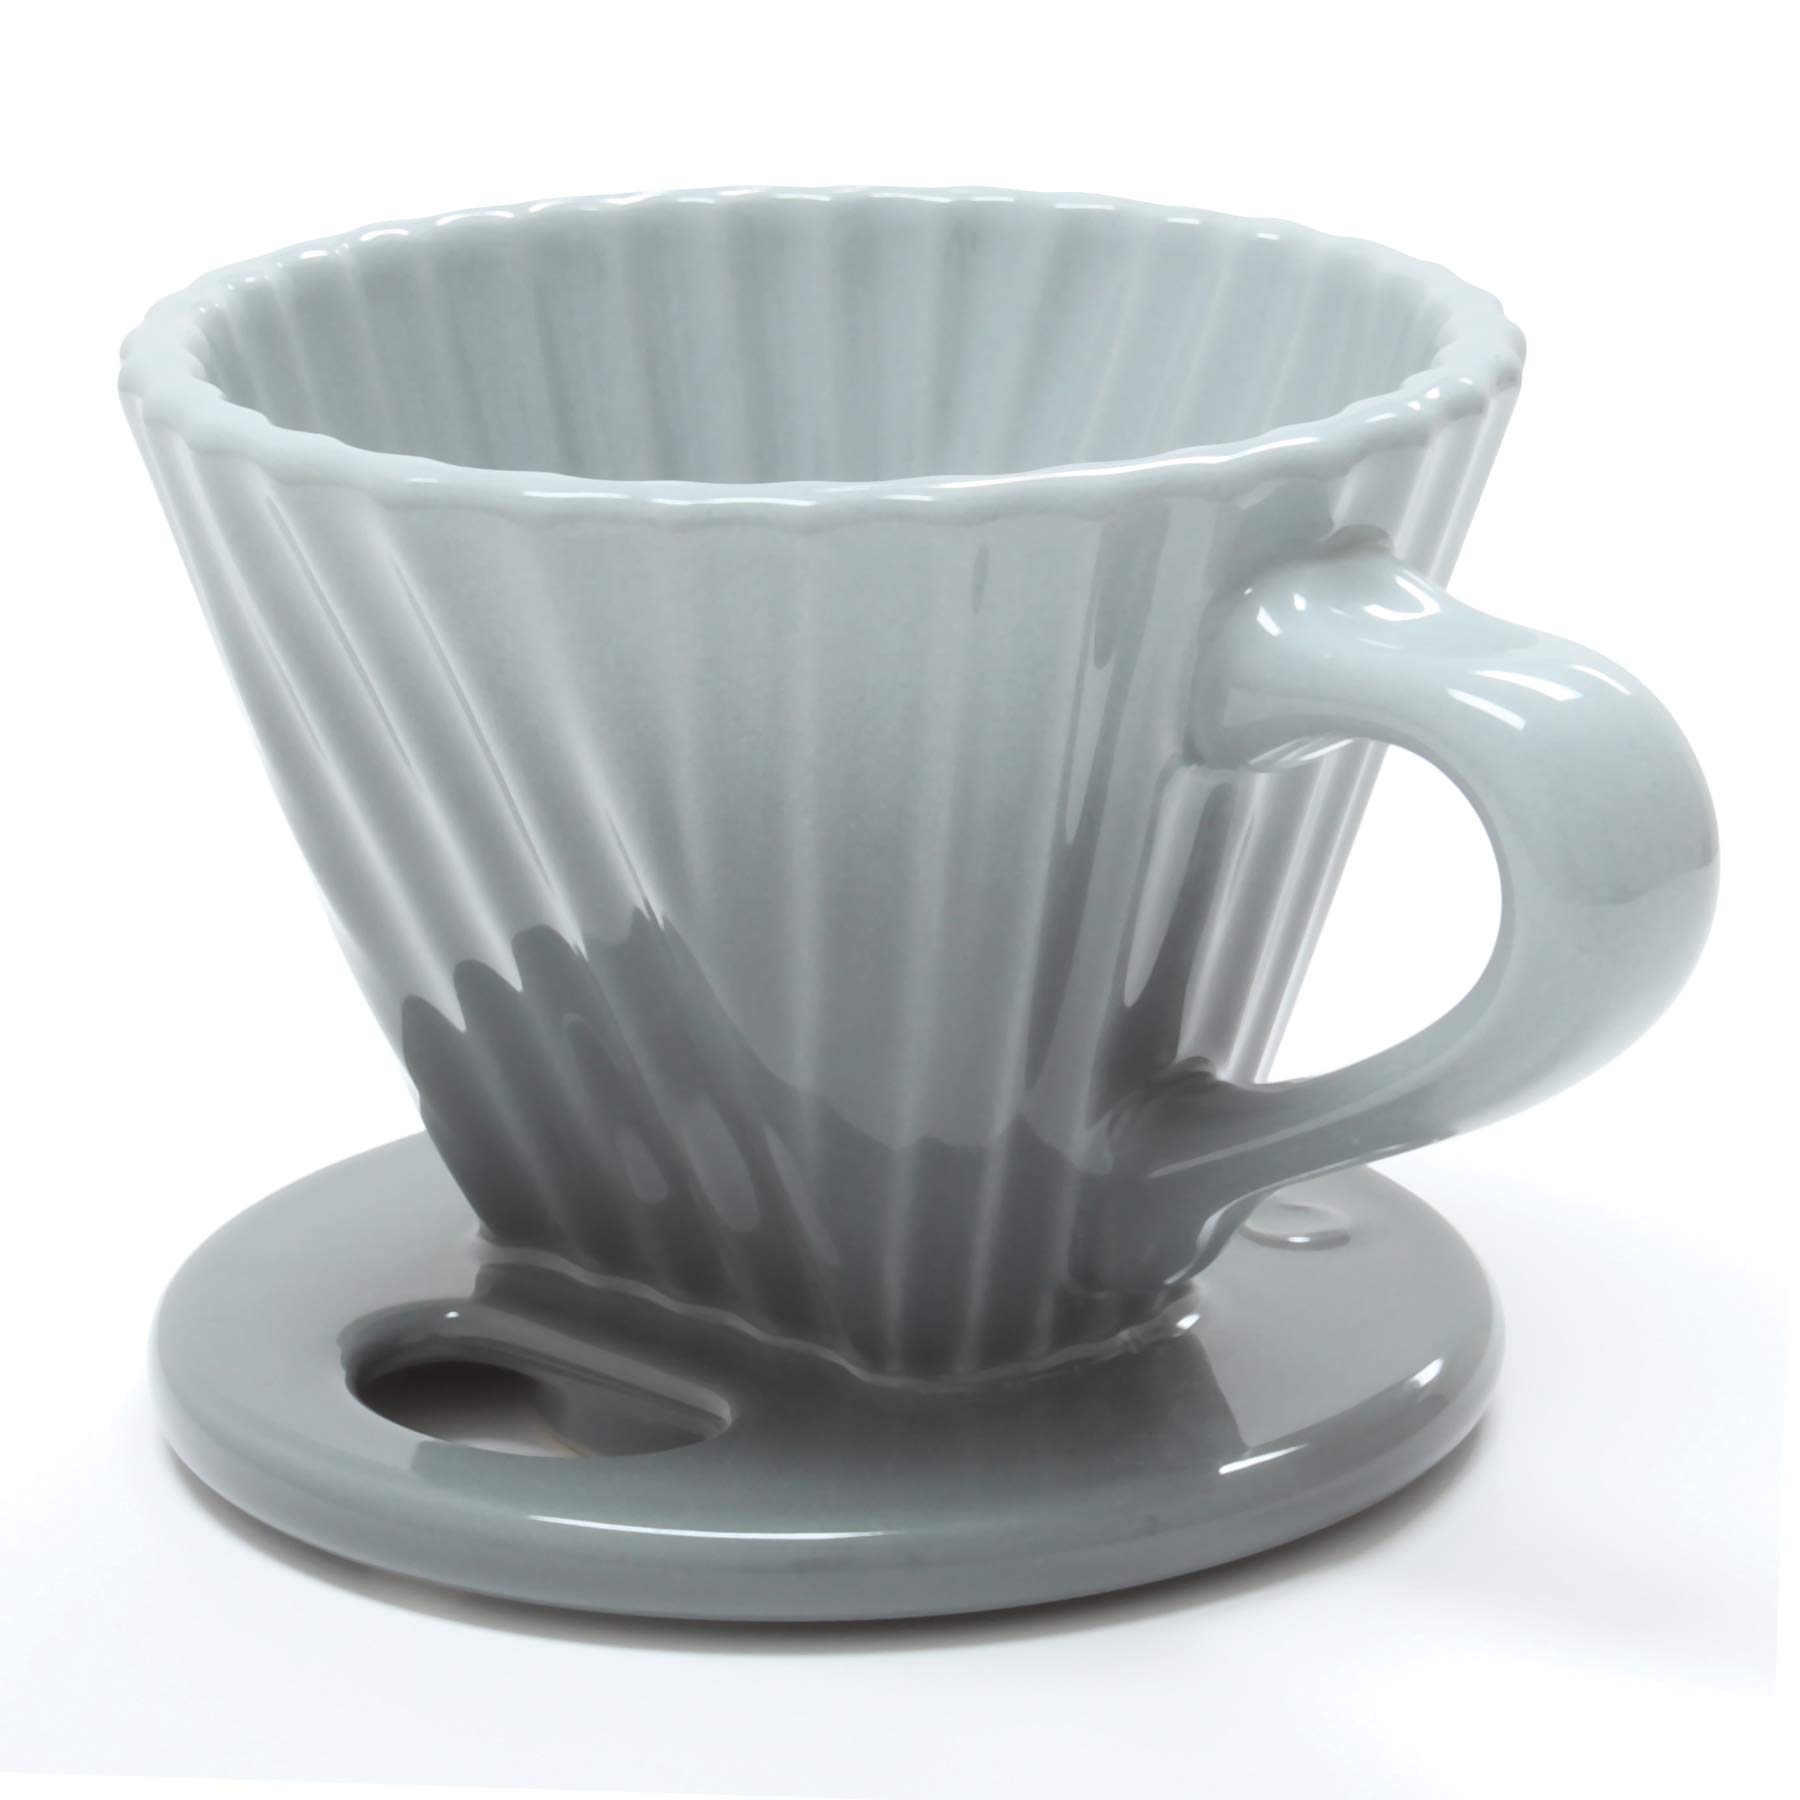 Chantal Lotus ceramic pour over coffee dripper